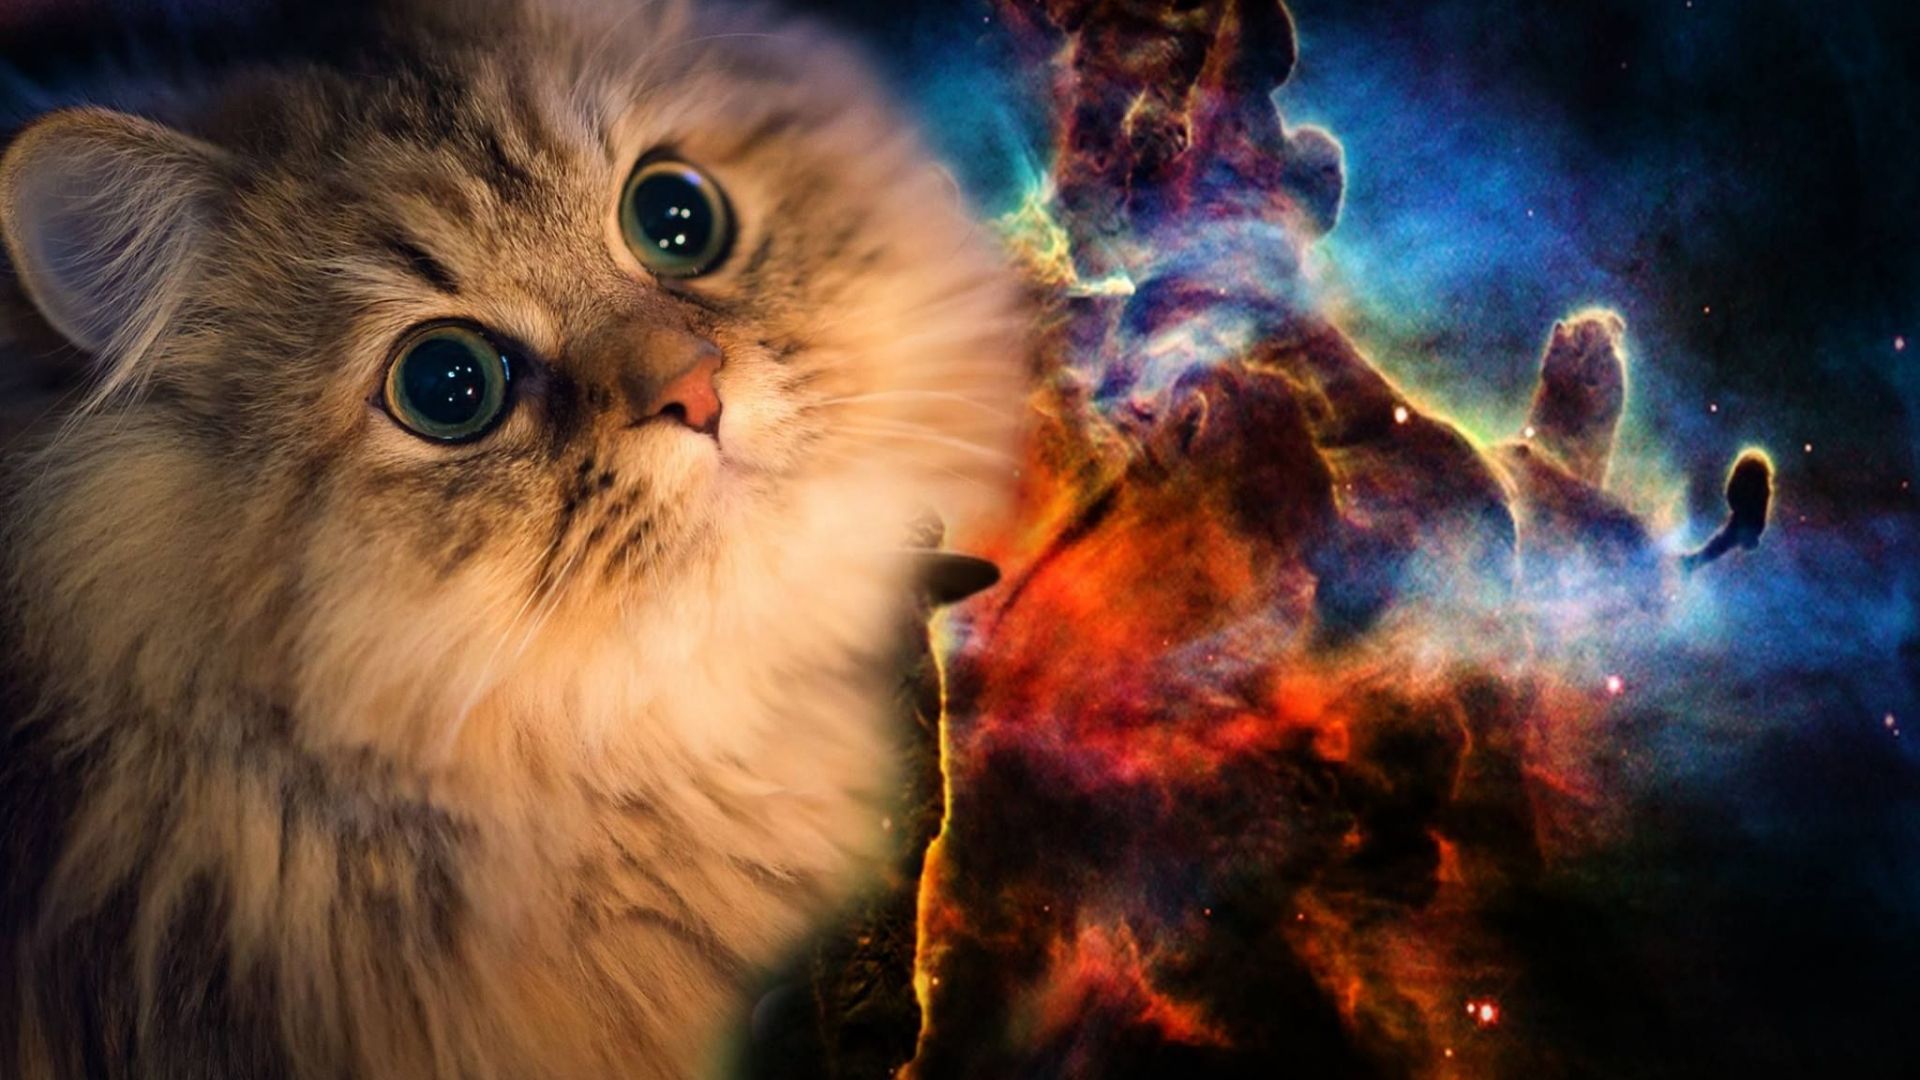 Free download Space Cat Wallpaper High Quality For Desktop